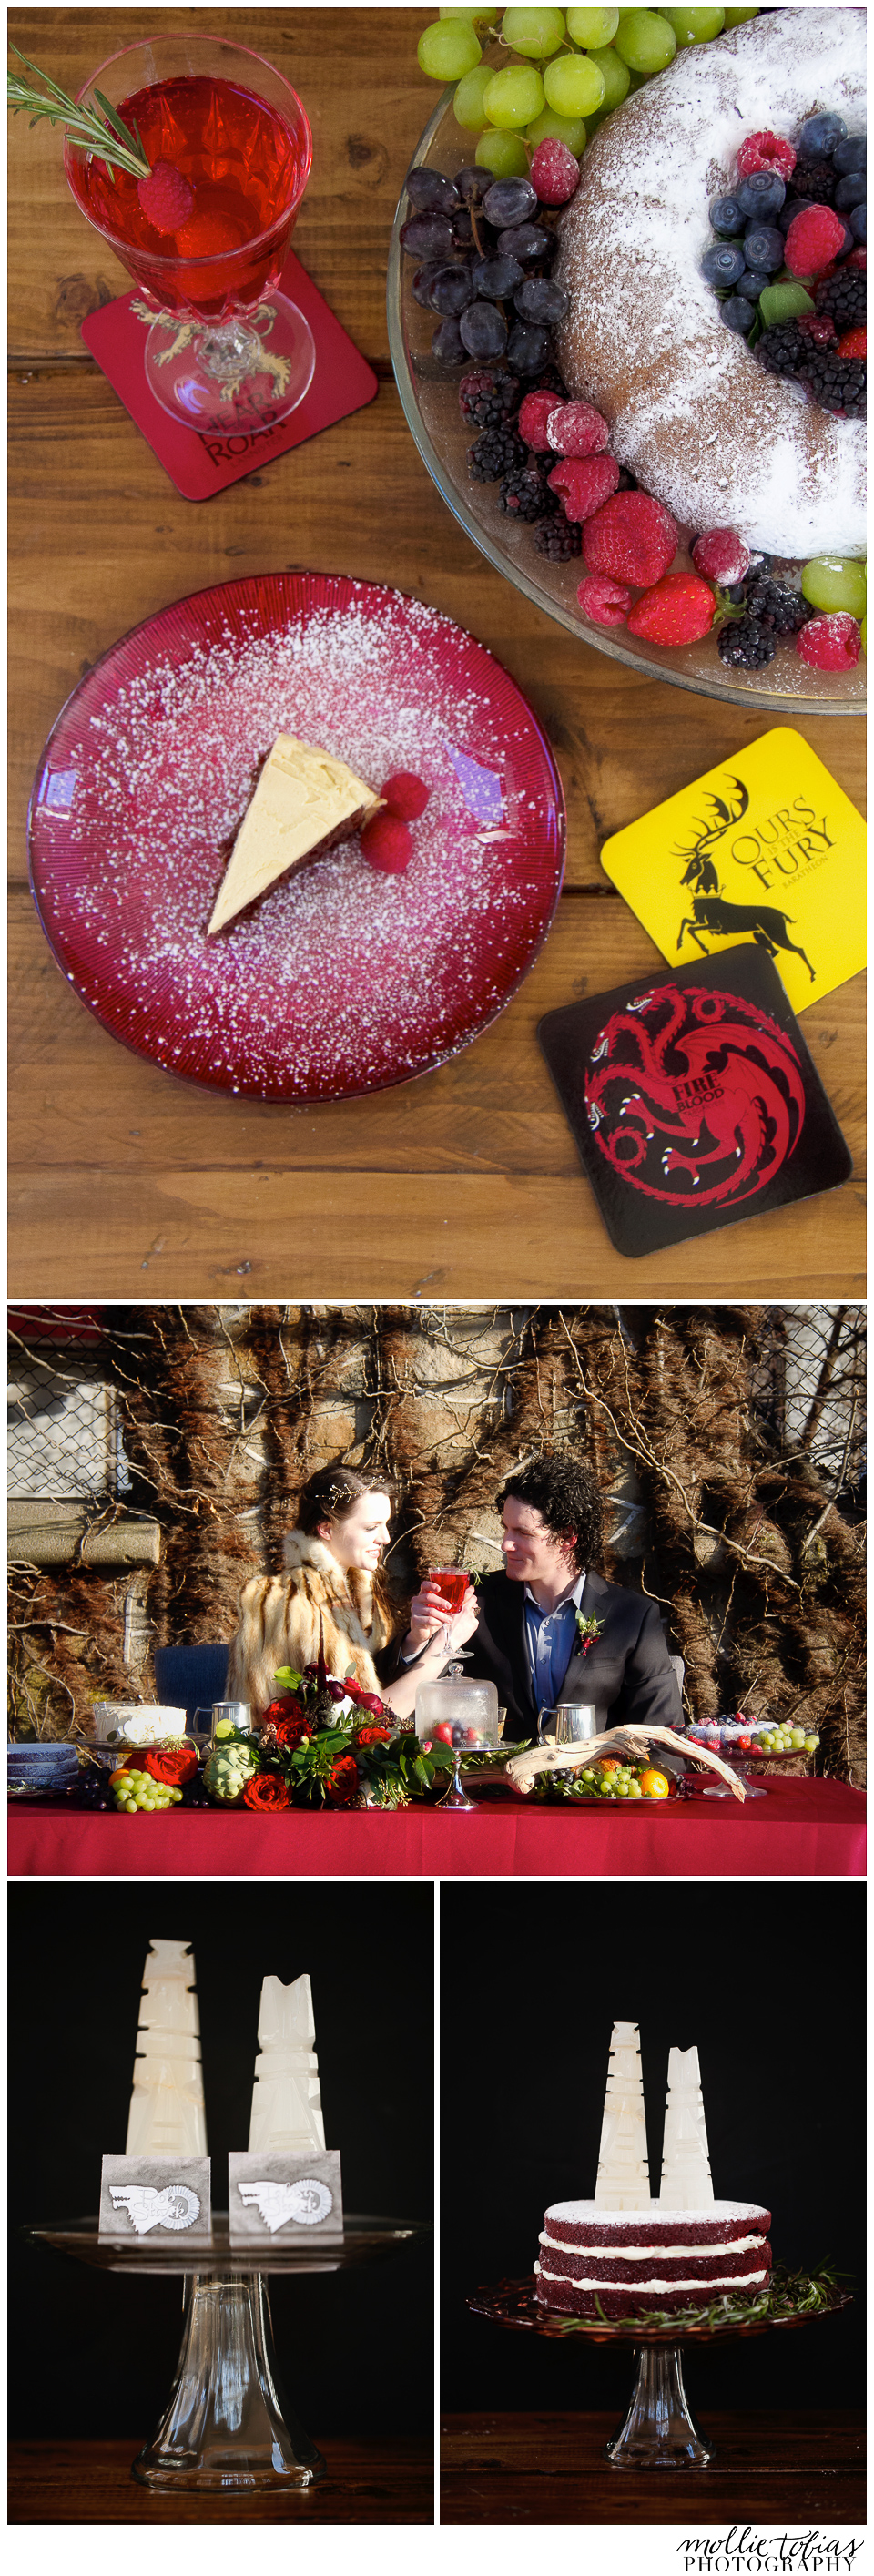 Winter is Coming - A Game of Thrones Inspired Wedding